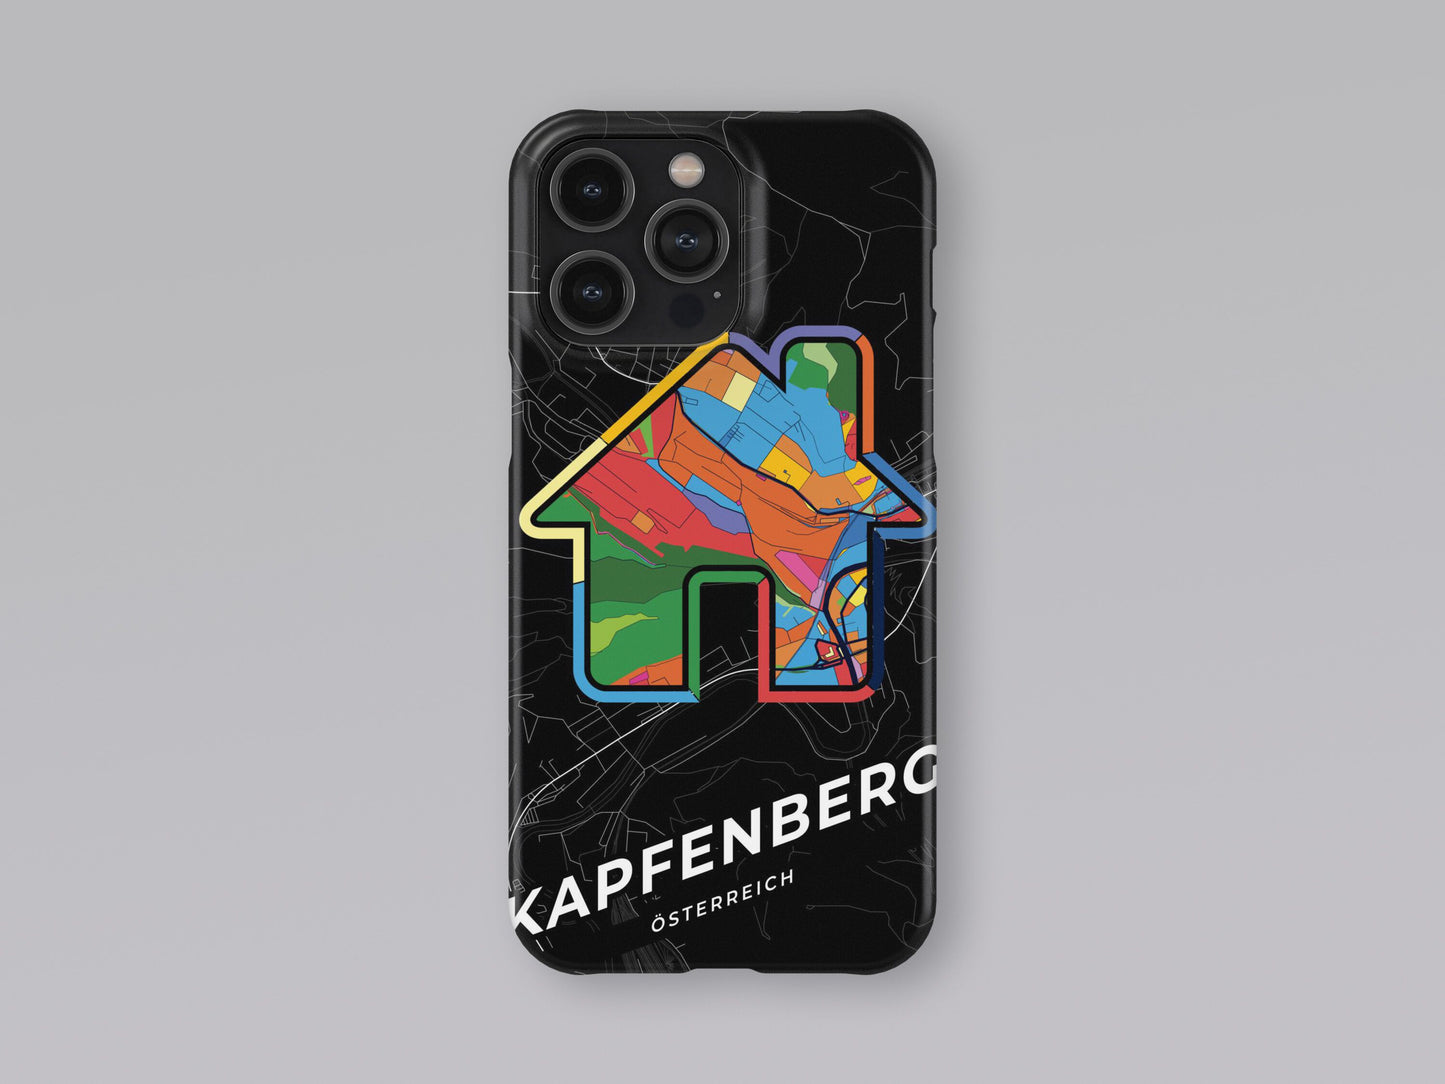 Kapfenberg Österreich slim phone case with colorful icon. Birthday, wedding or housewarming gift. Couple match cases. 3